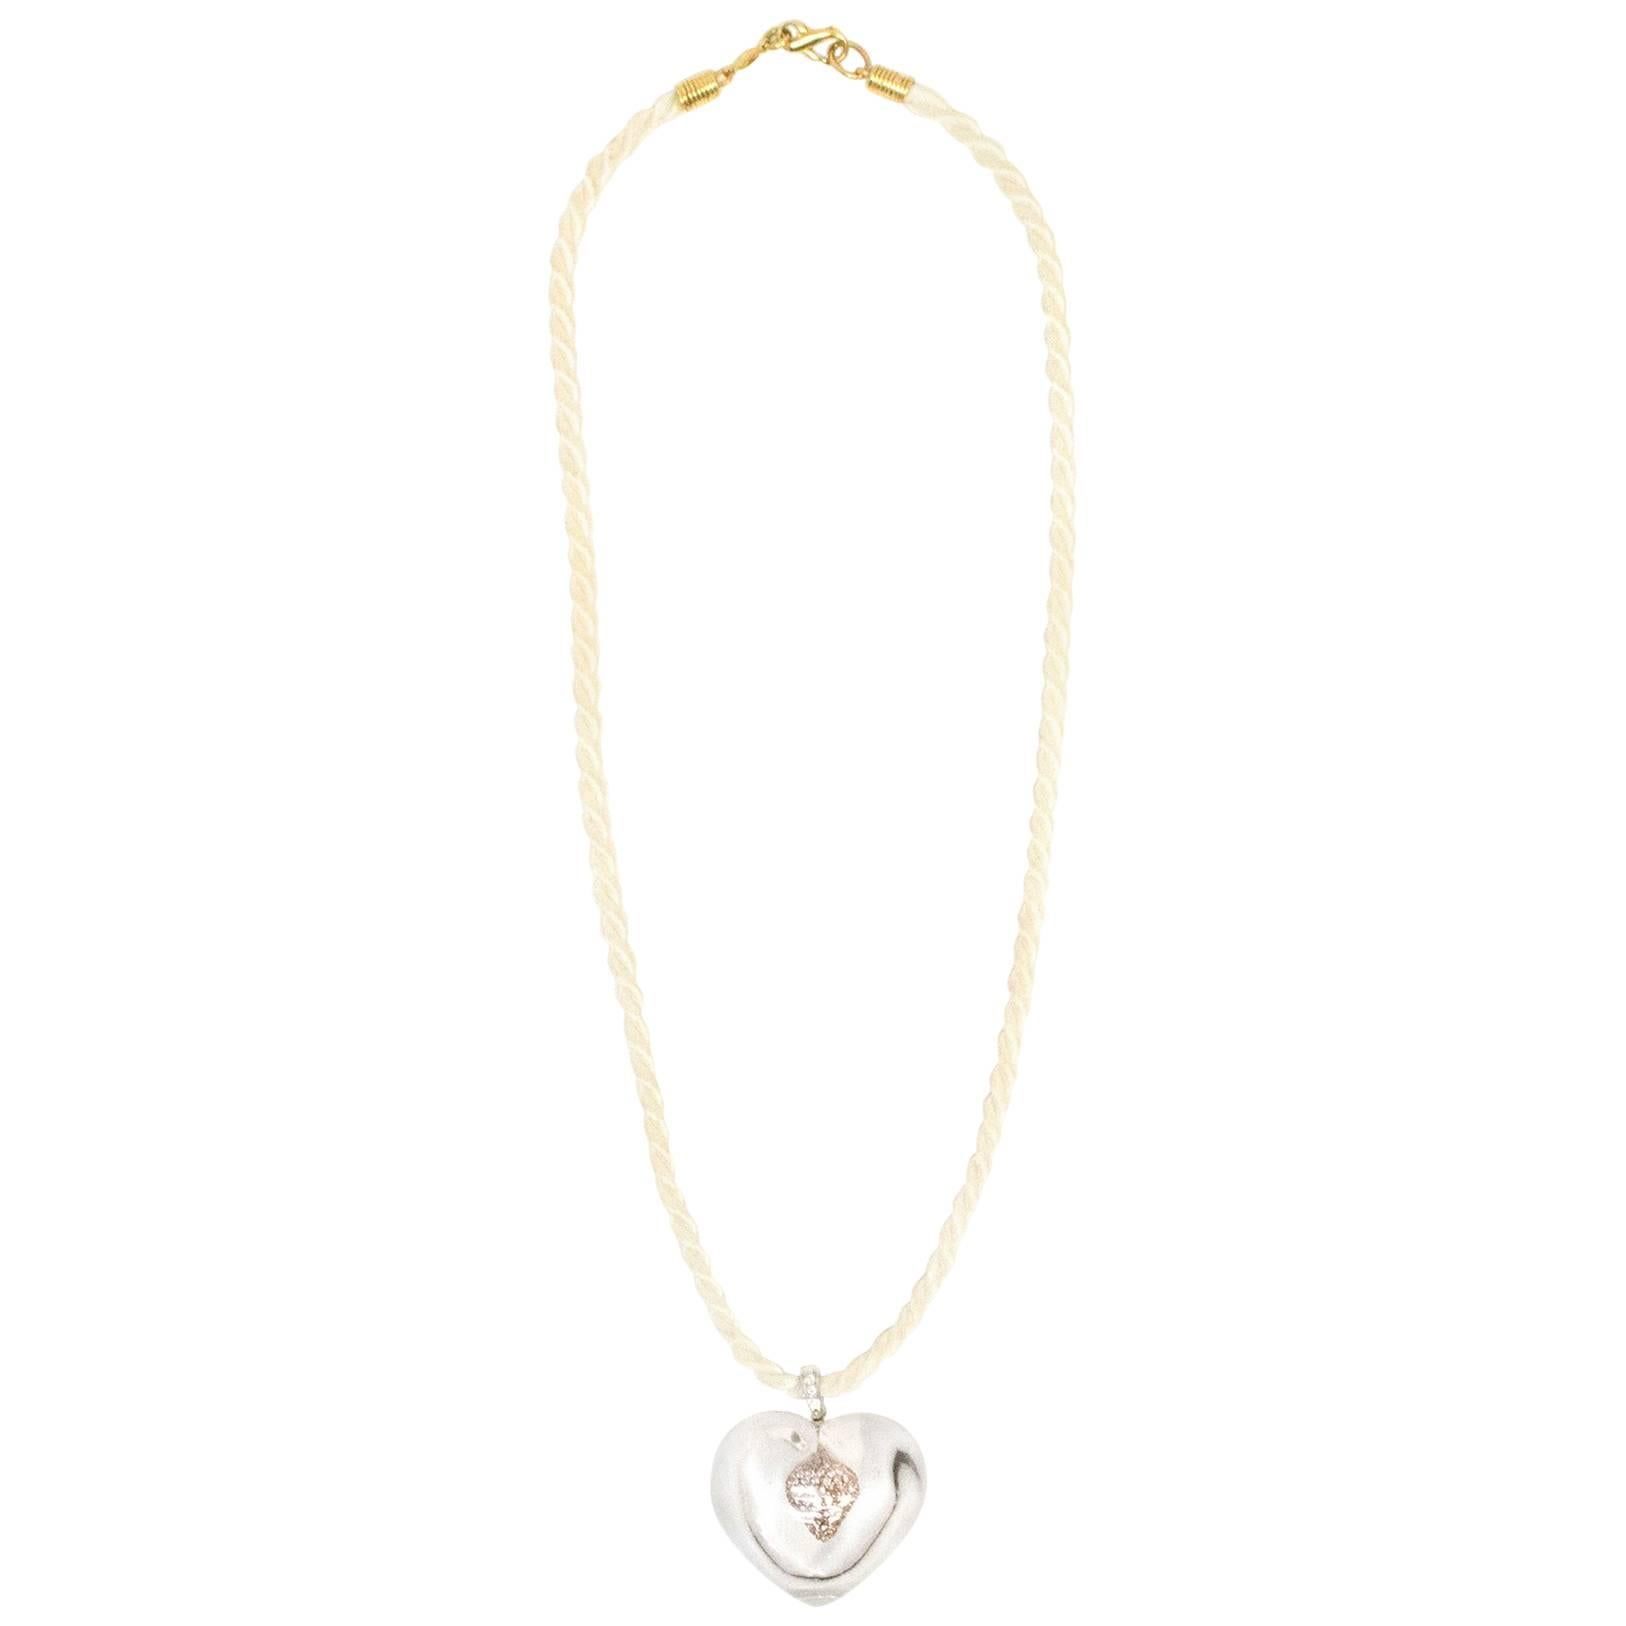 18 Carat Heart Necklace with a Crystal Heart Pendant For Sale